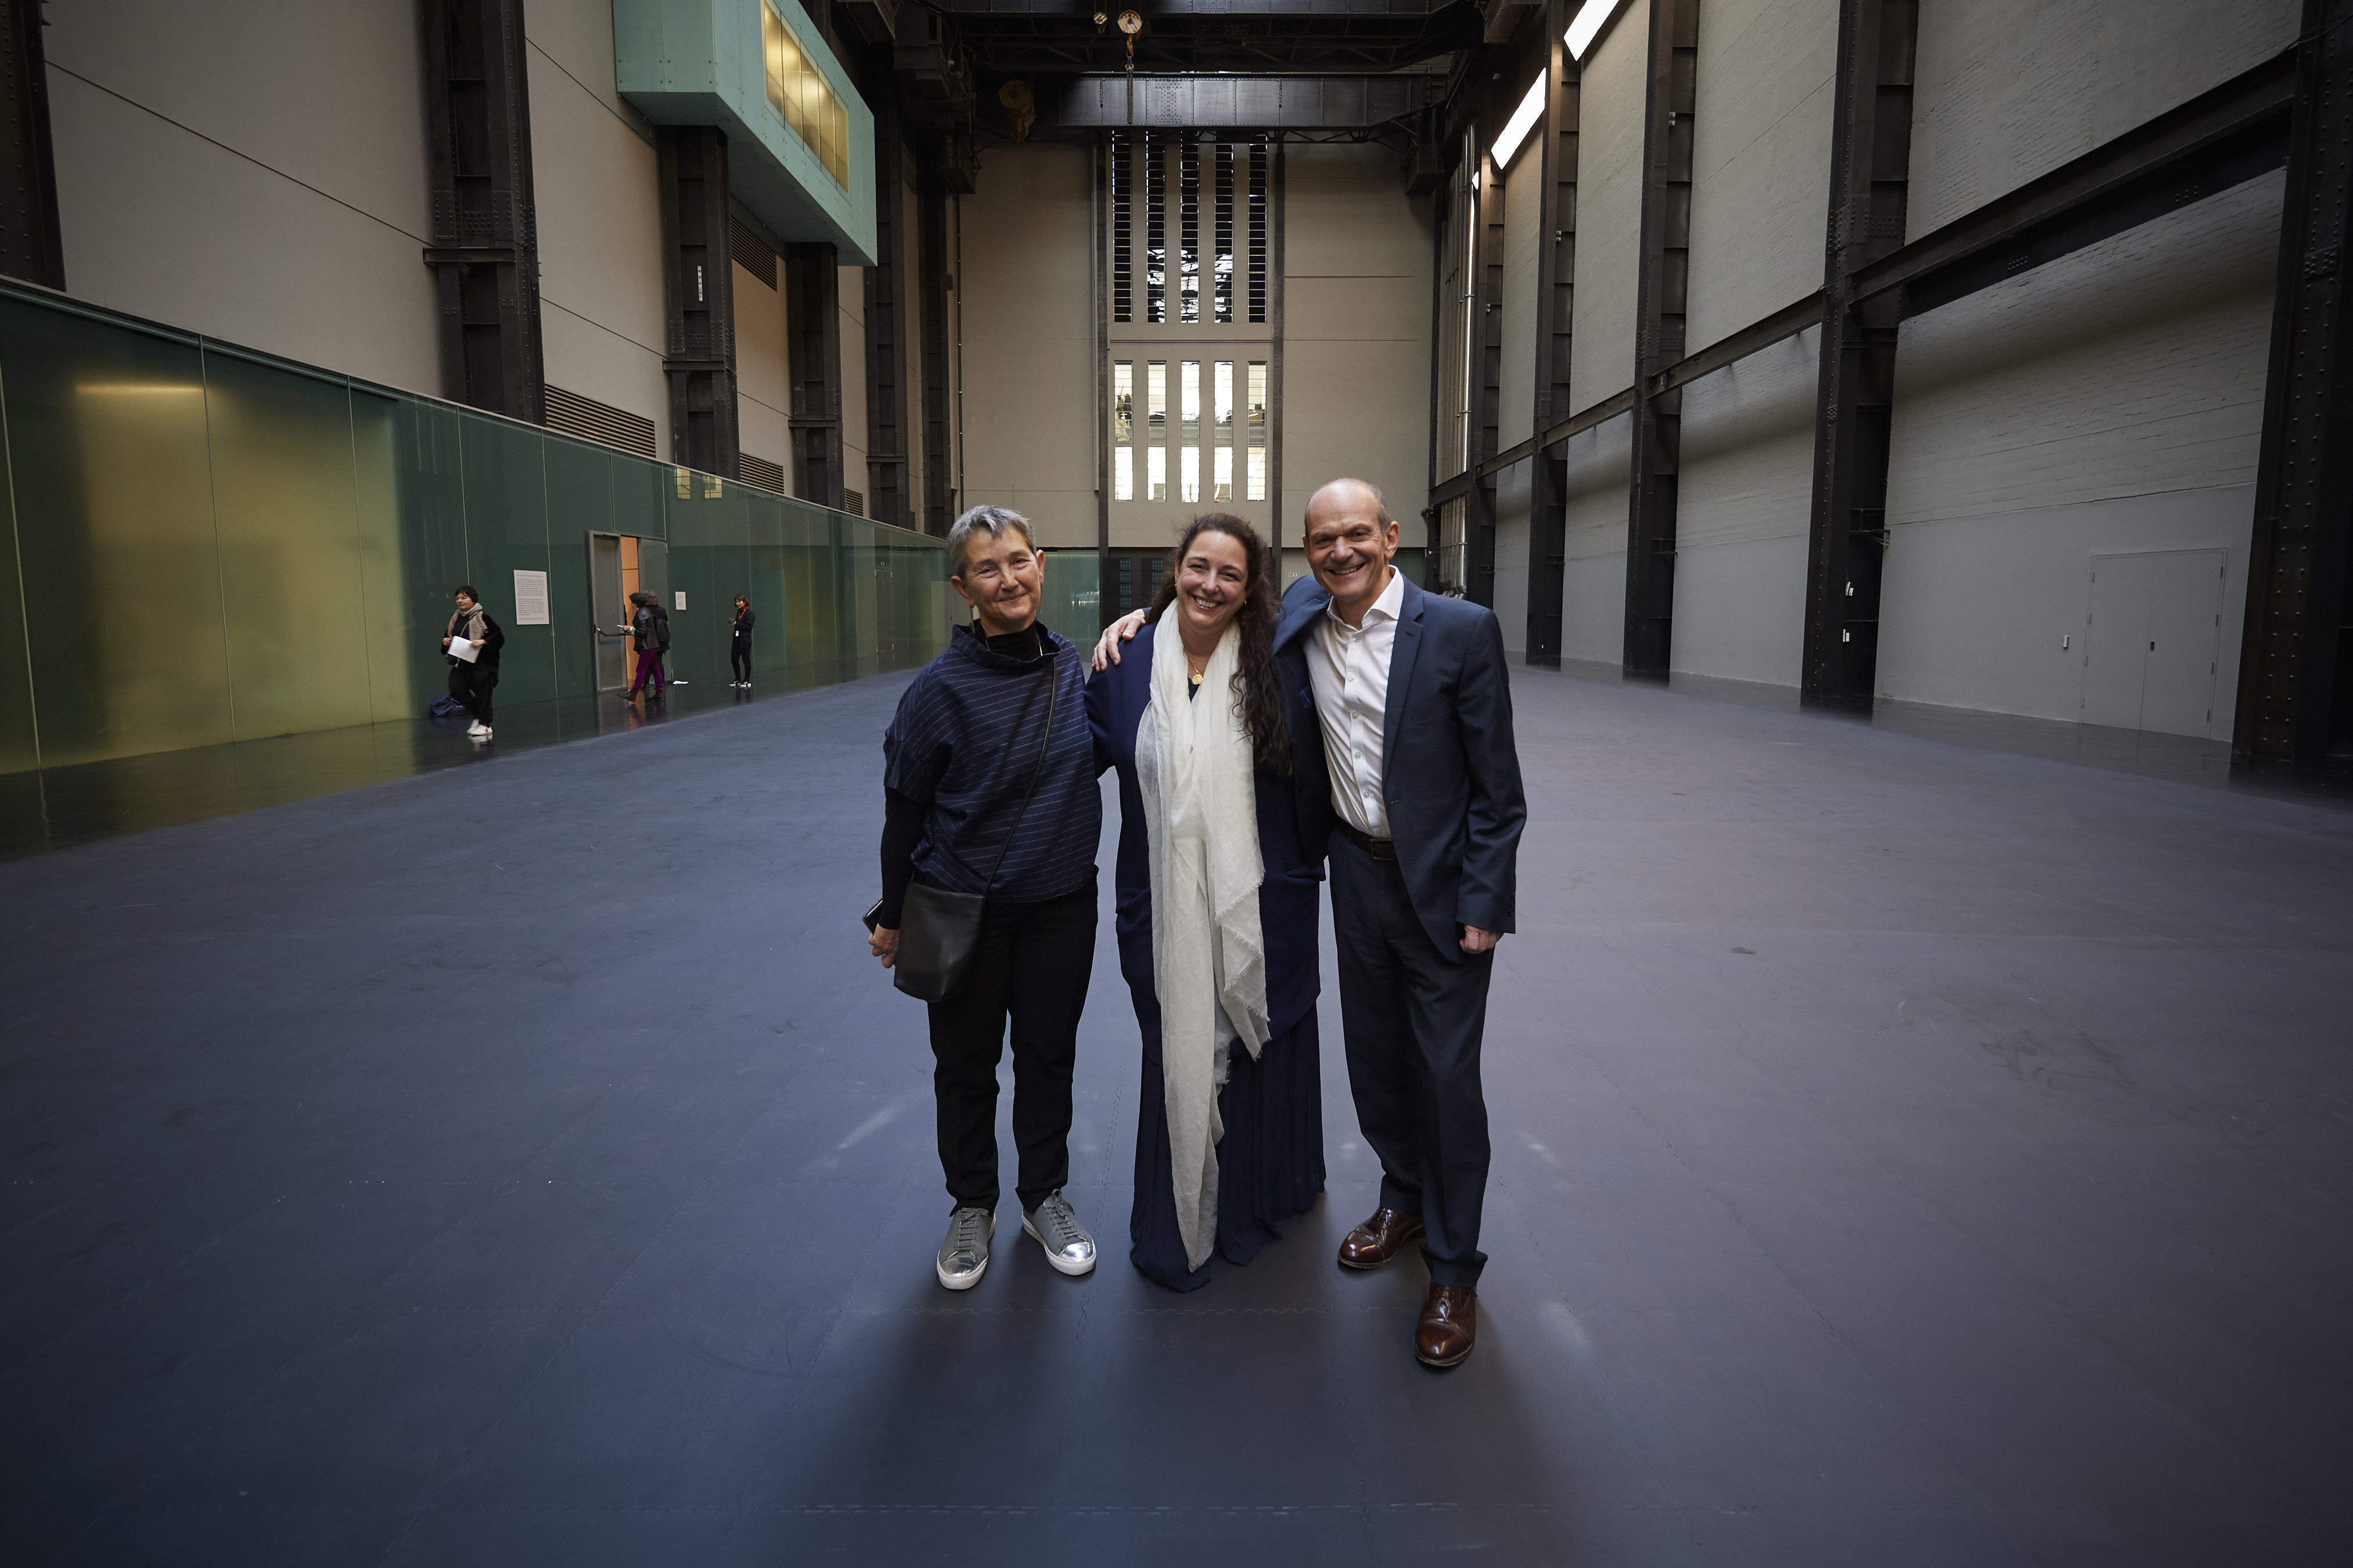 Hyundai Motor and Tate Modern Announce the Opening of the Fourth Hyundai Commission by Tania Bruguera